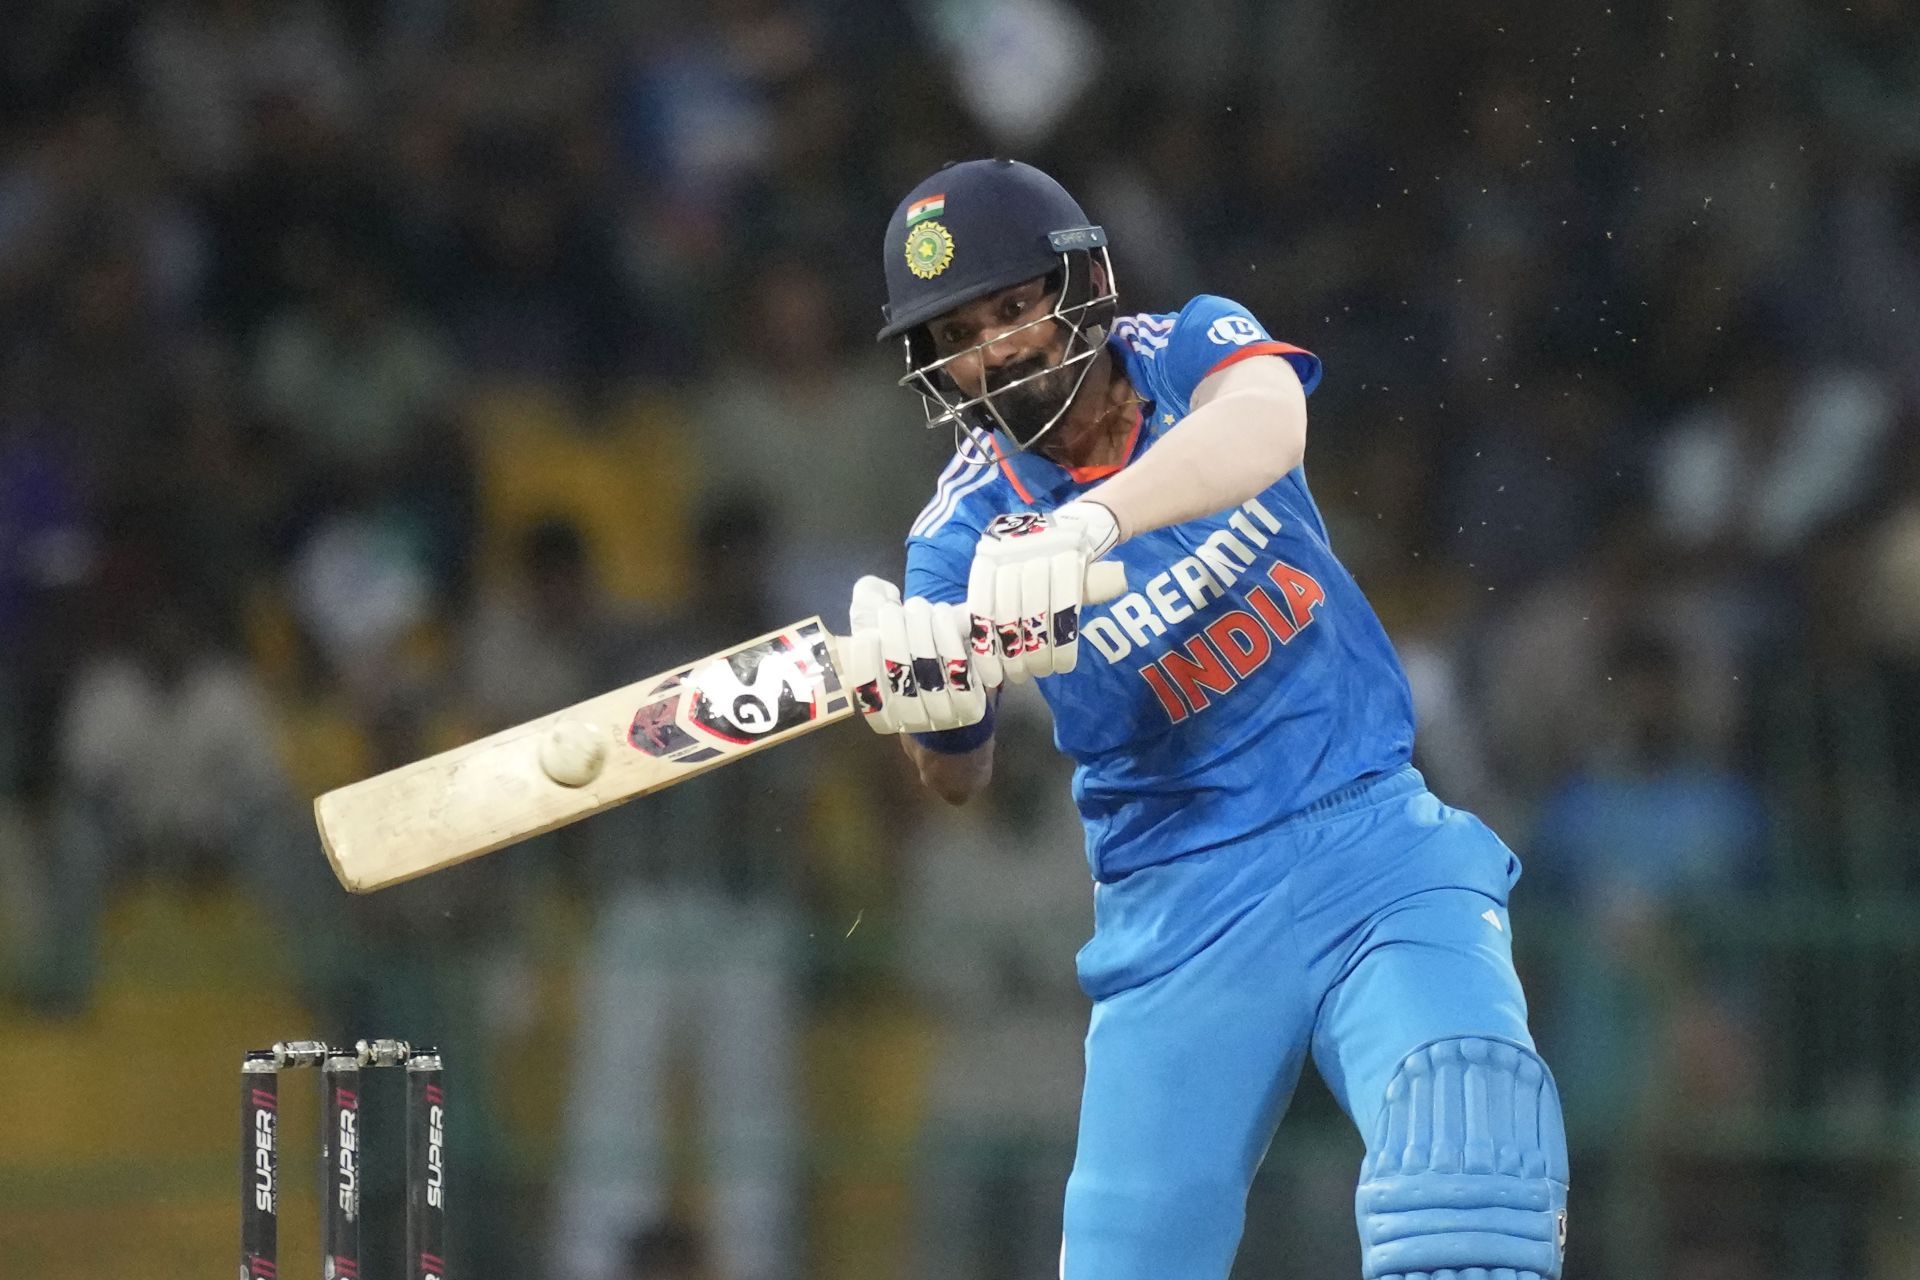 KL Rahul led India to an encouraging victory in the first ODI